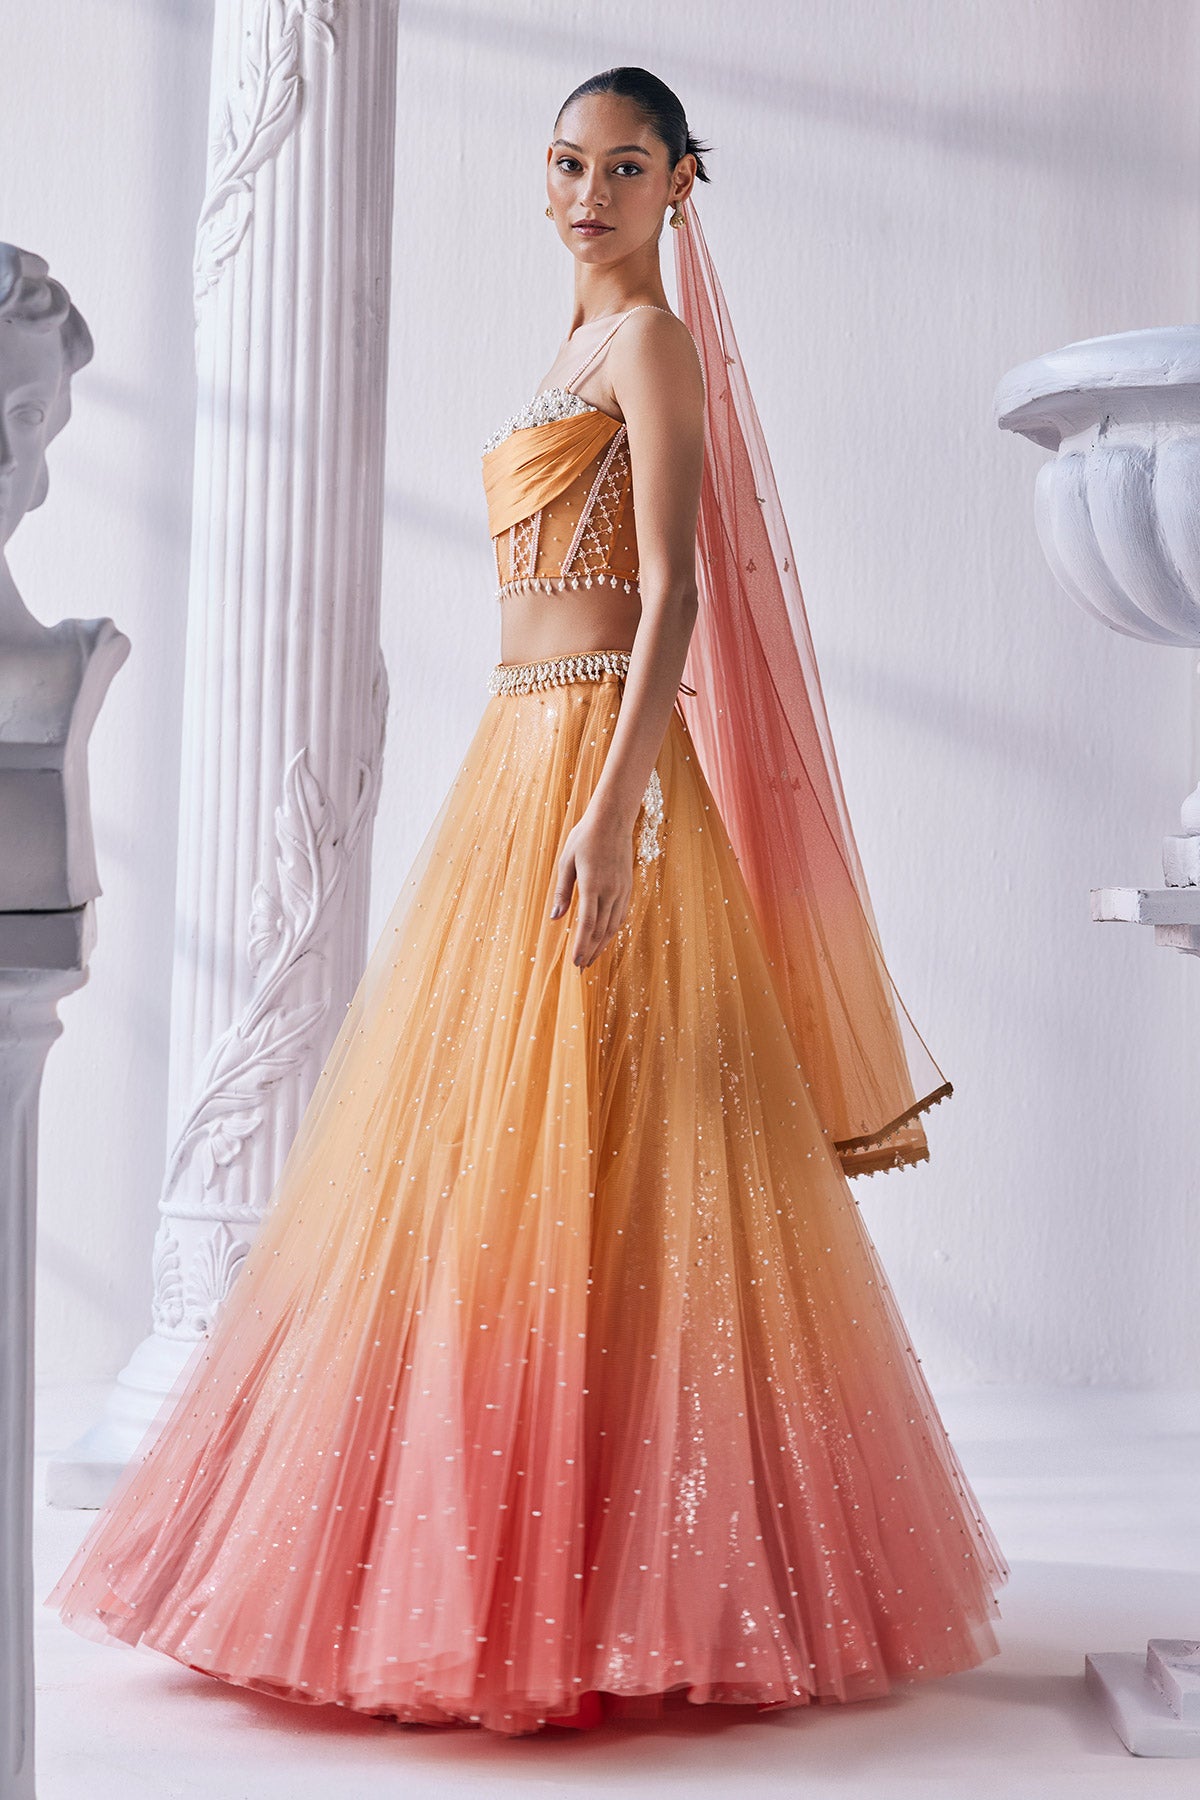 Satin Georgette Ombre Lehenga In Sequin And Pearl Detail. It Is Paired With A Bead Work Corset, Belt And A Dupatta.